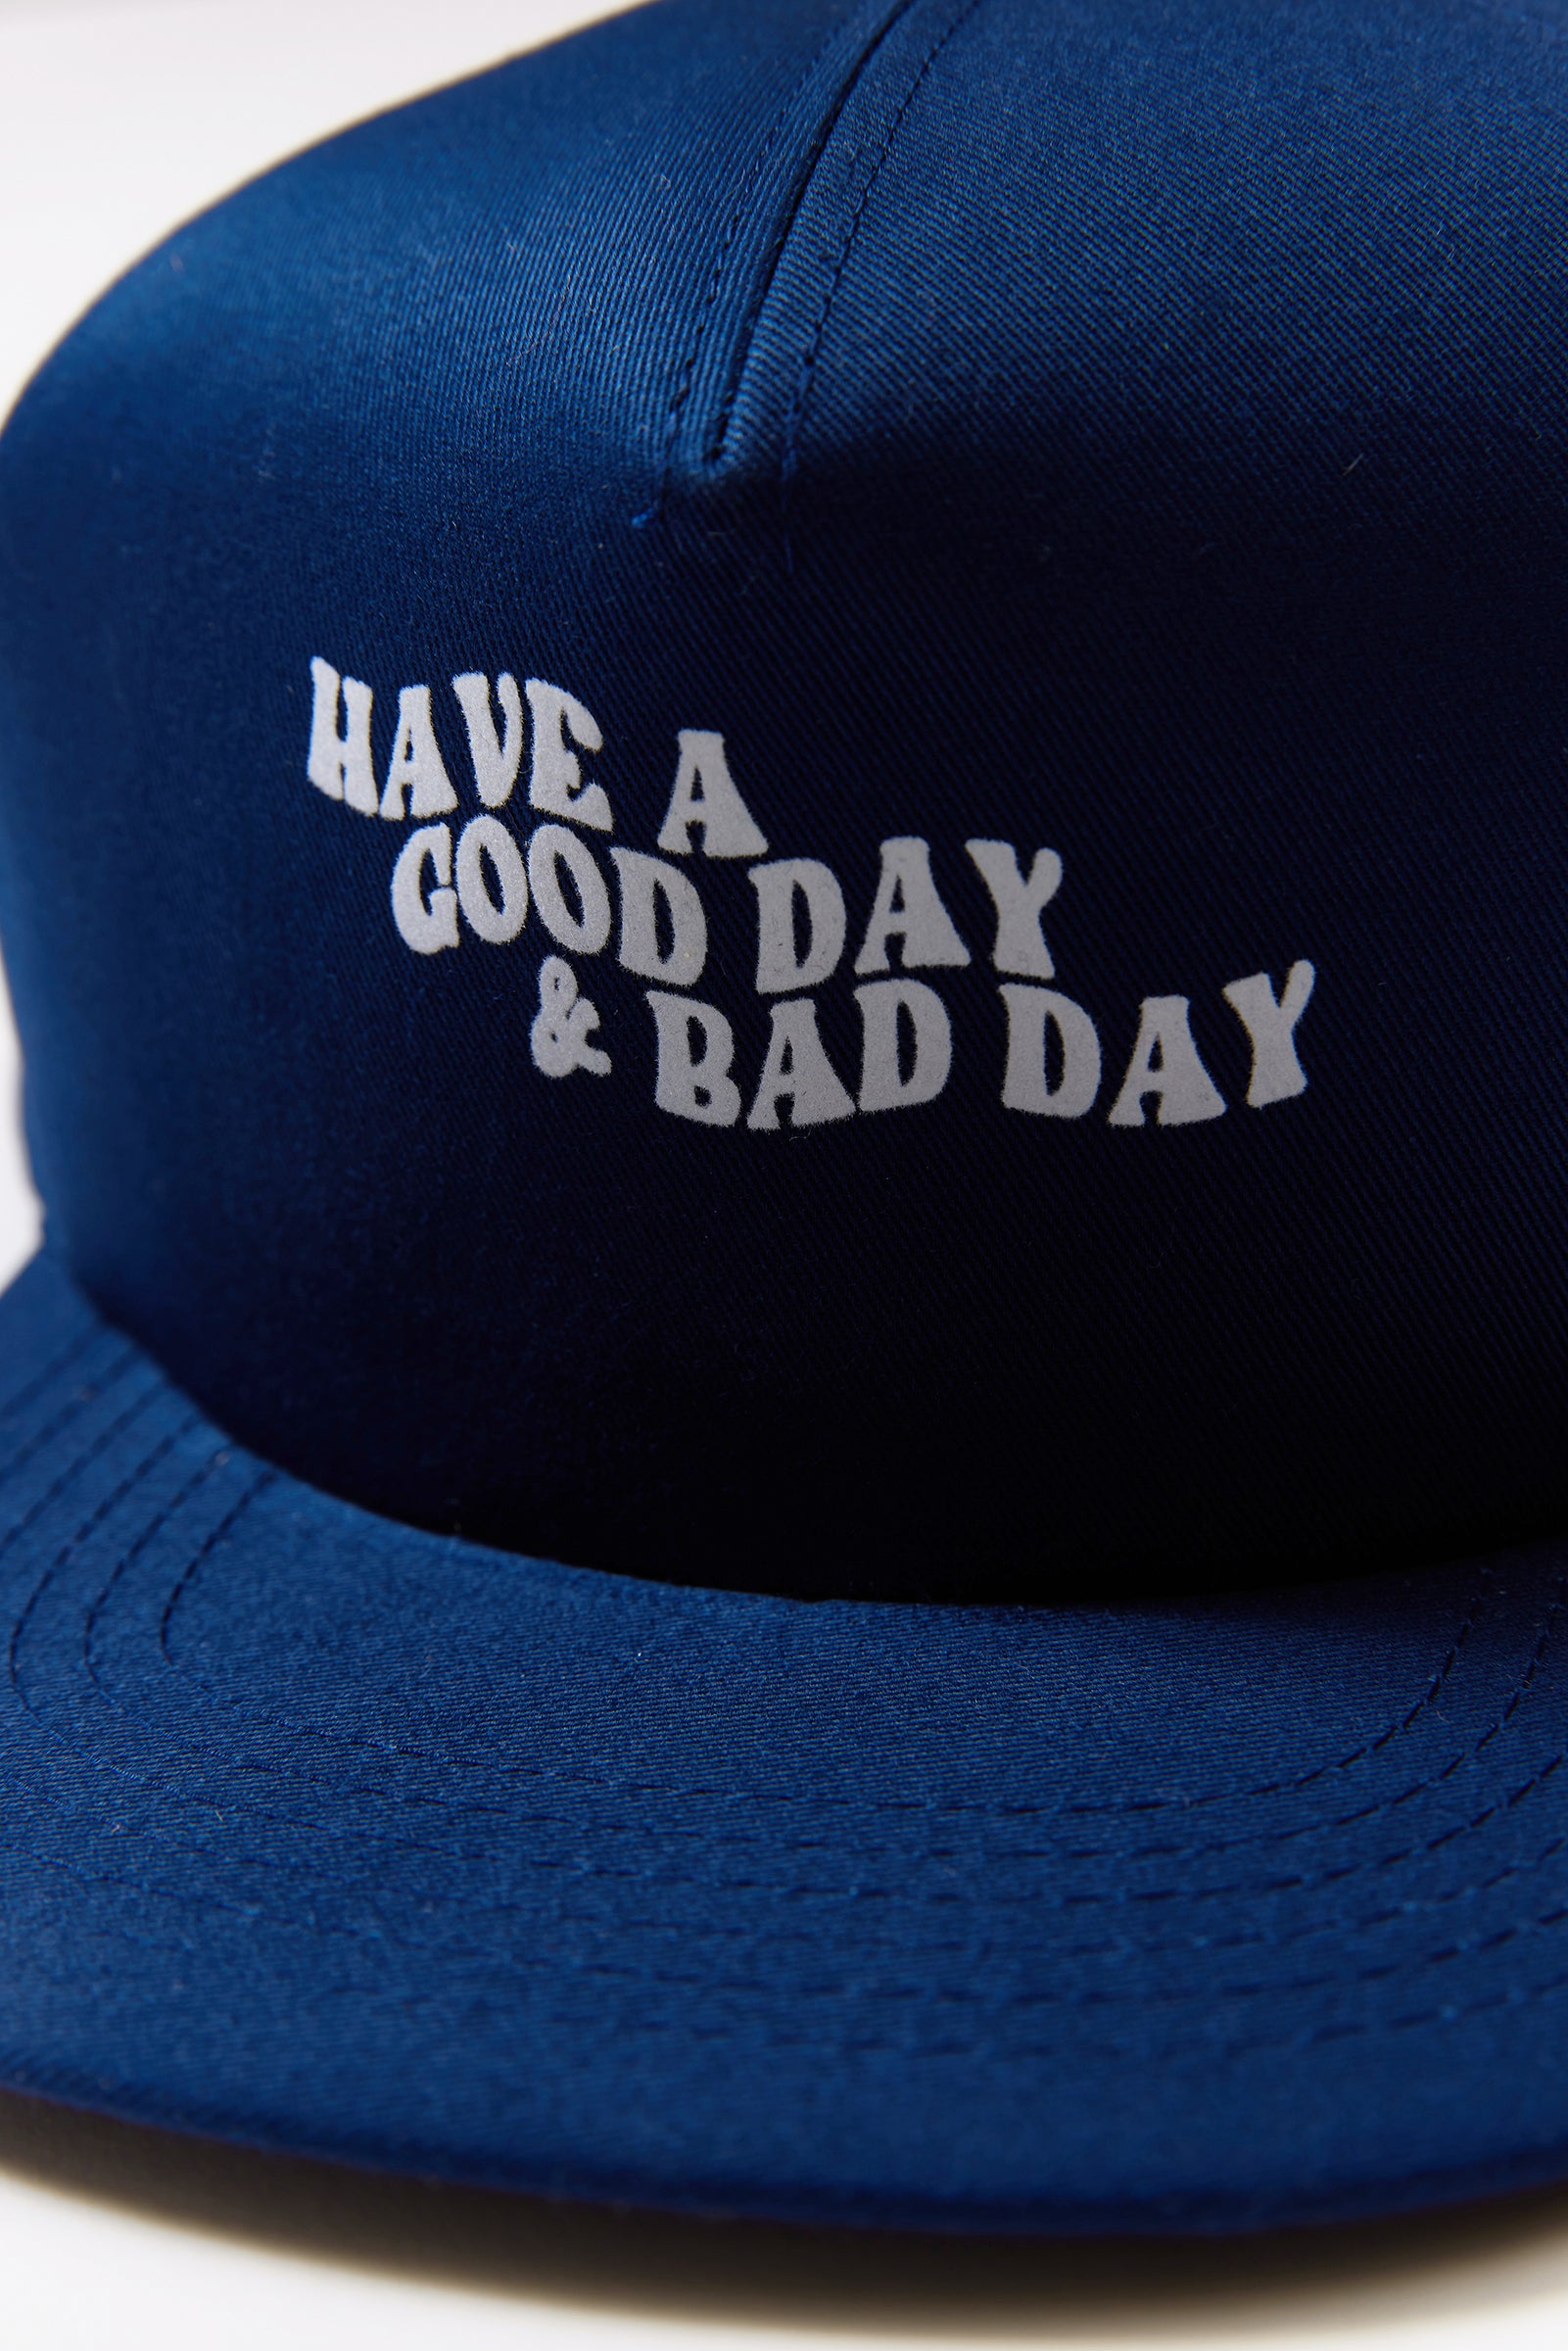 &quot;HAVE A GOOD DAY &amp; BAD DAY&quot; トラッカーキャップ